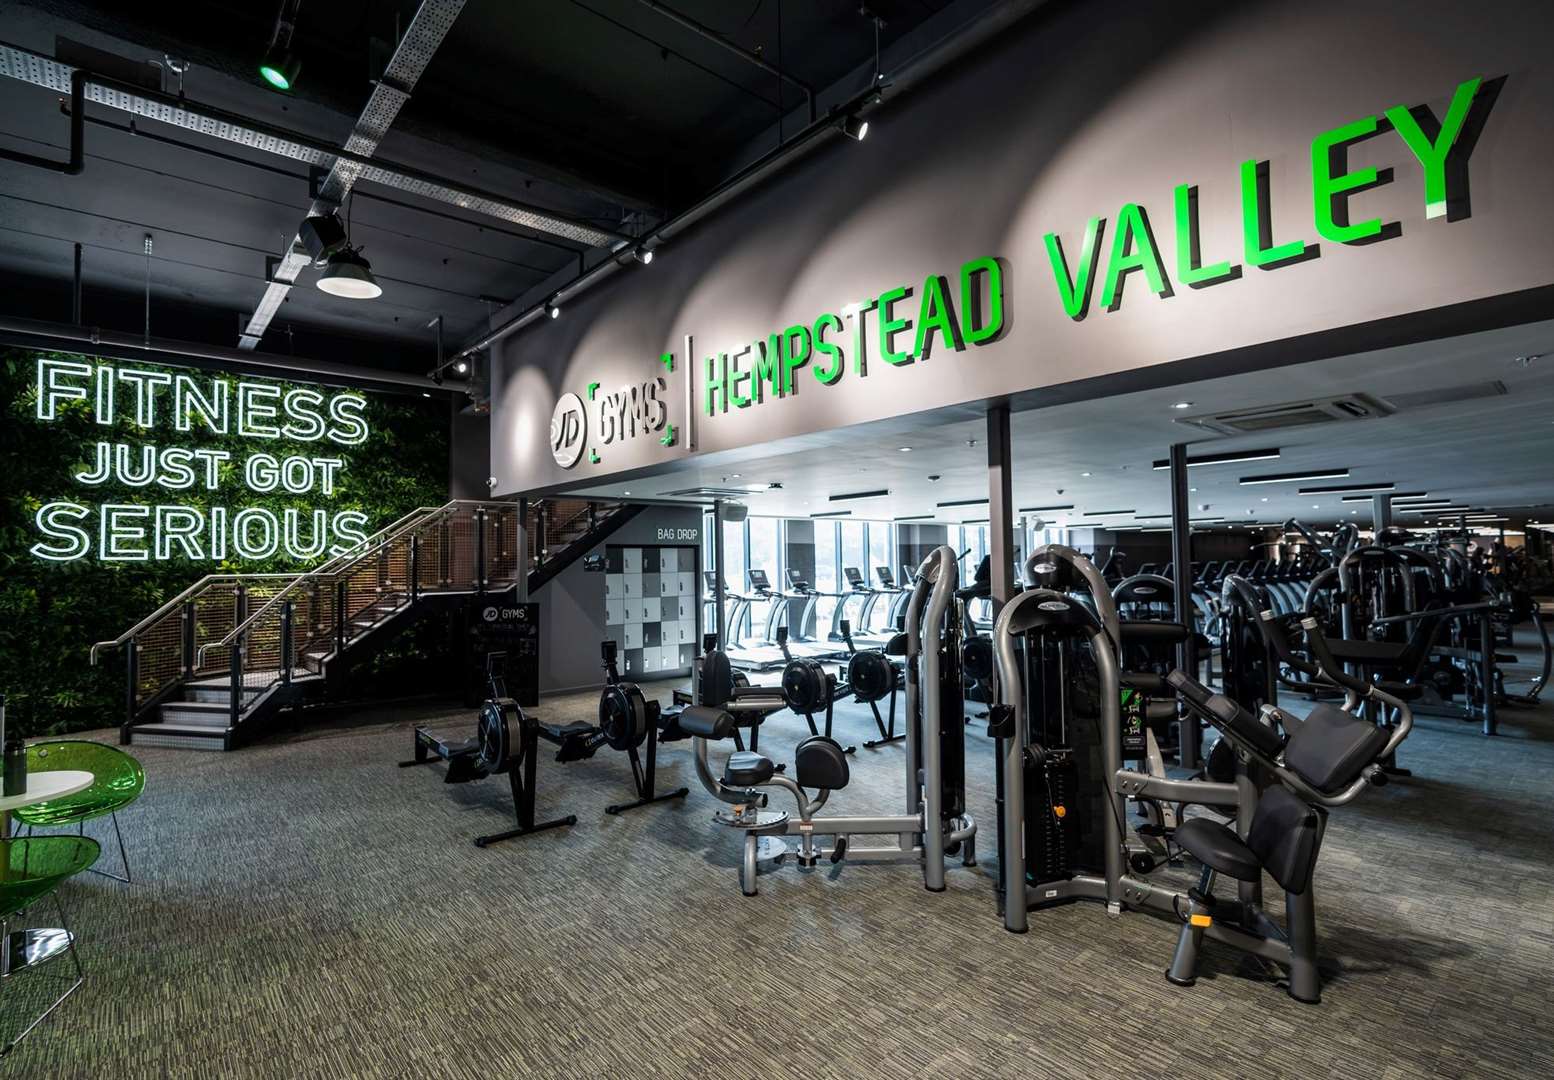 JD Gyms wants to join other gyms in Kent in opening 24 hours a day, seven days a week. Image: Facebook.